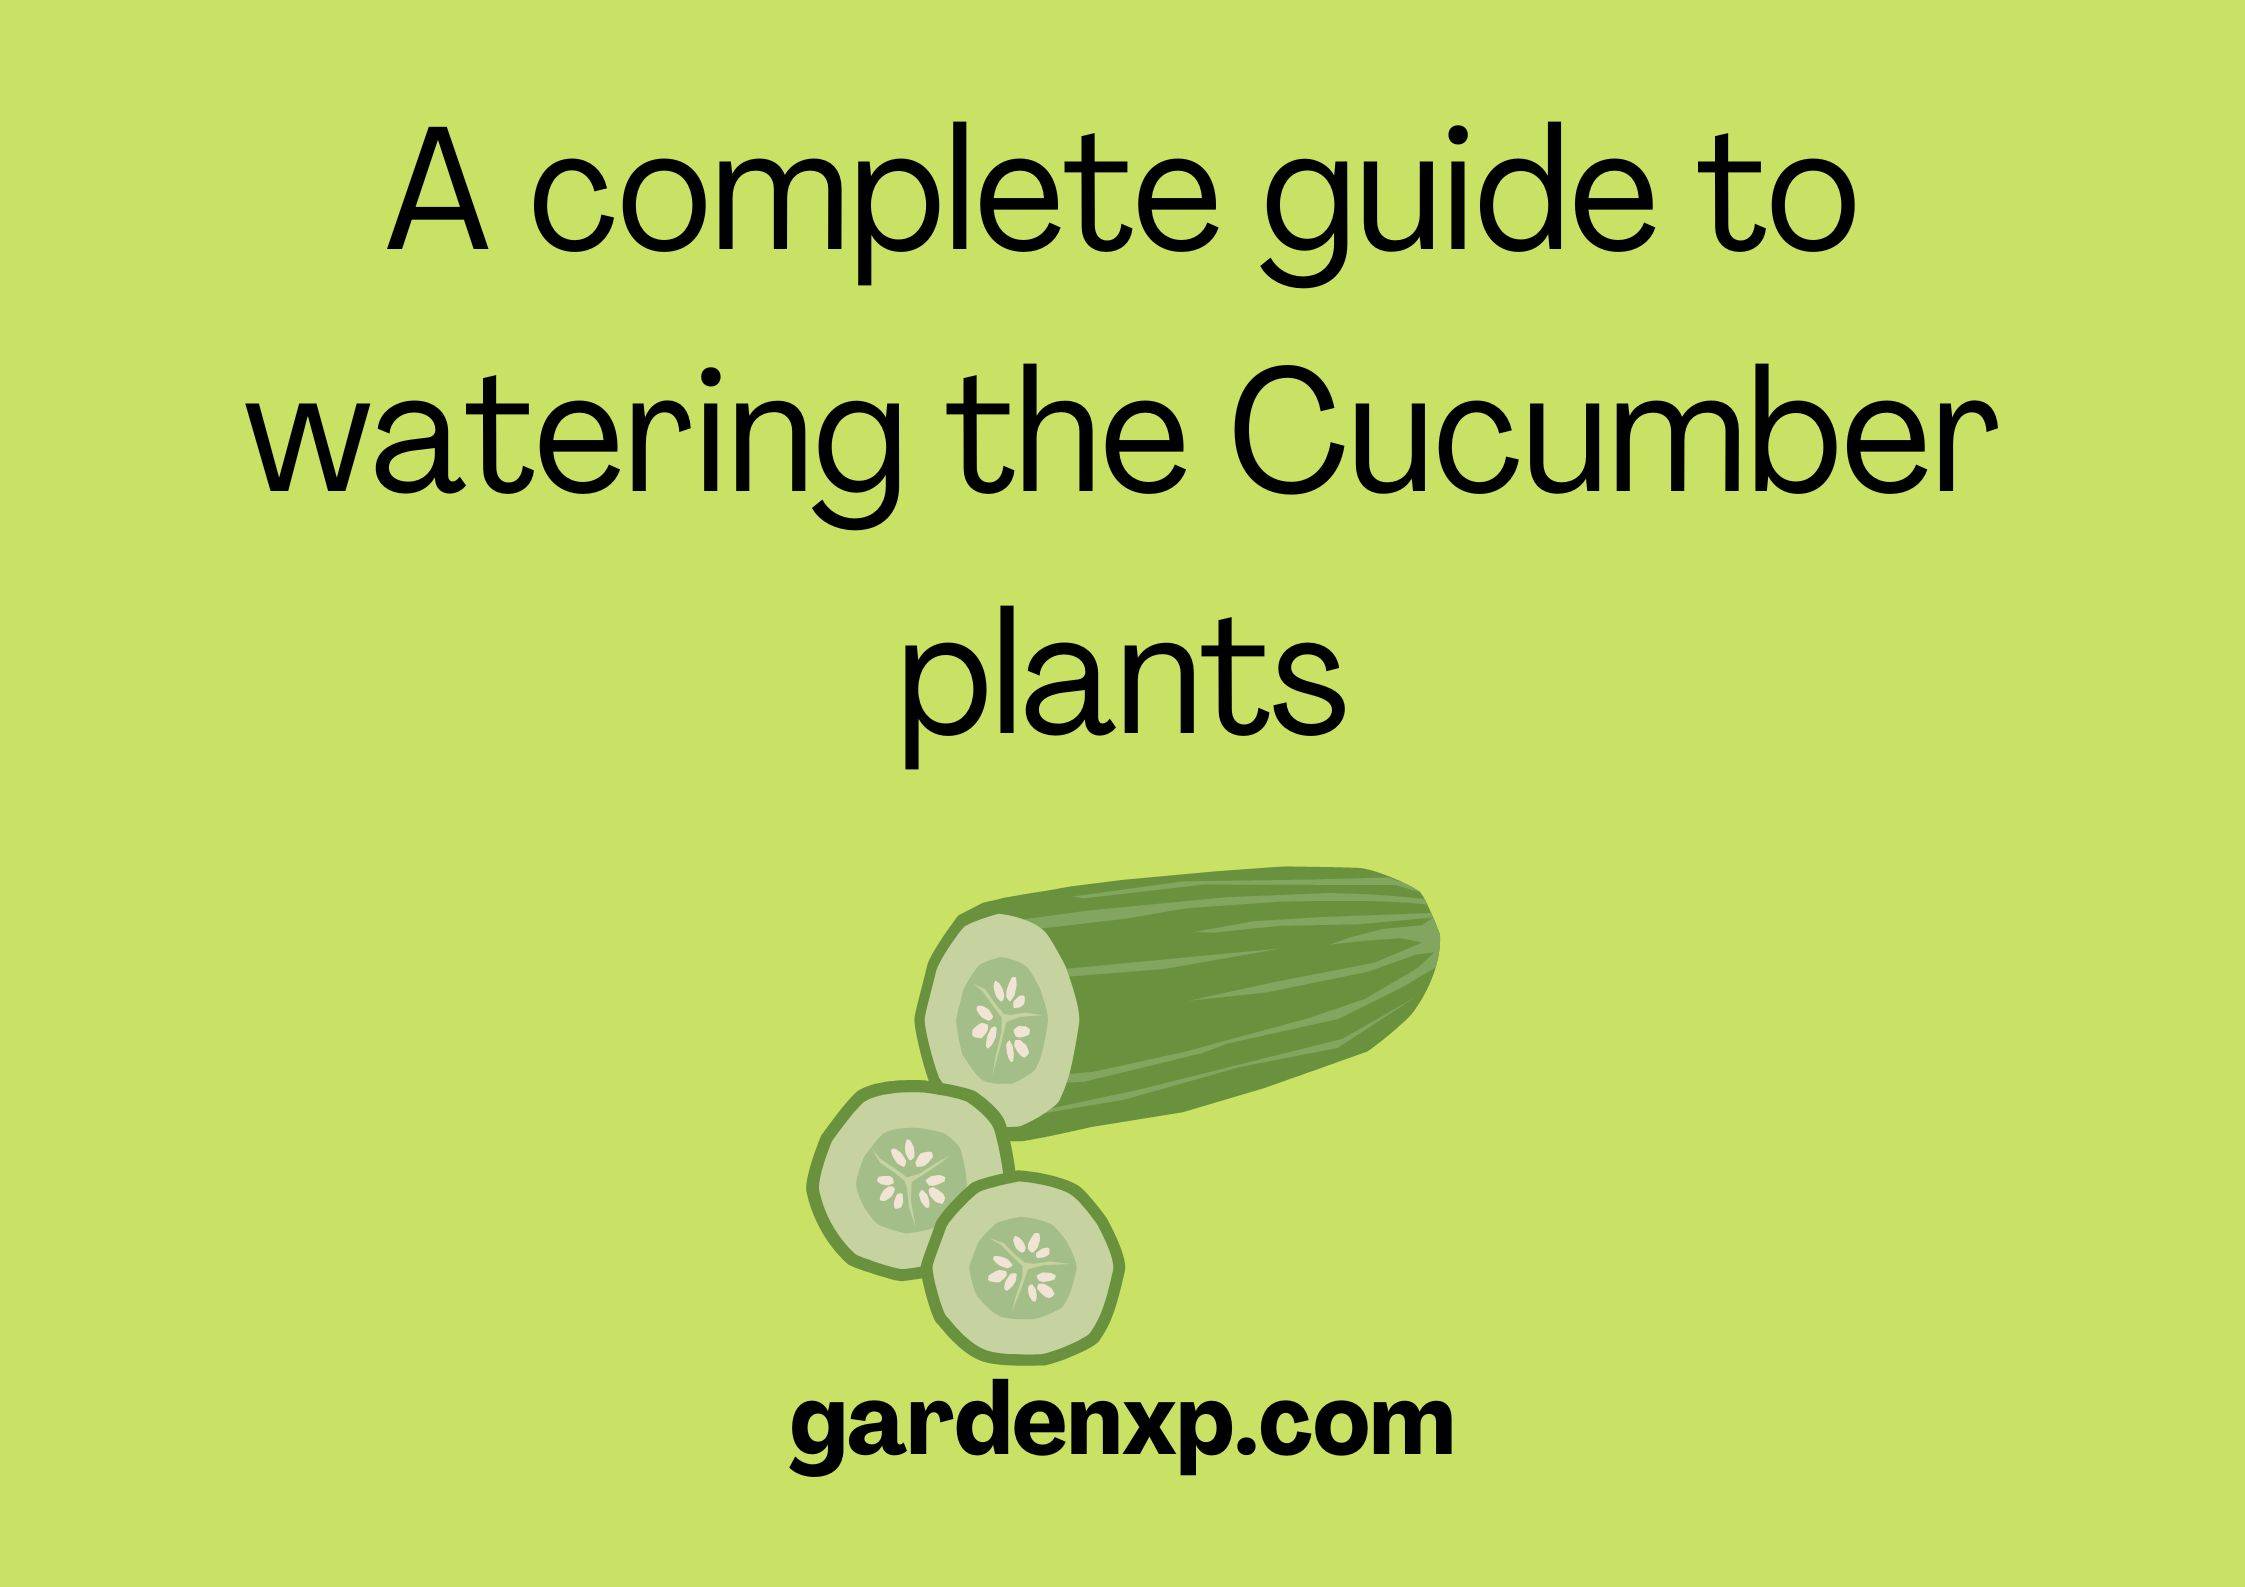 How often to water Cucumber Plants? - Watering cucumber plants 